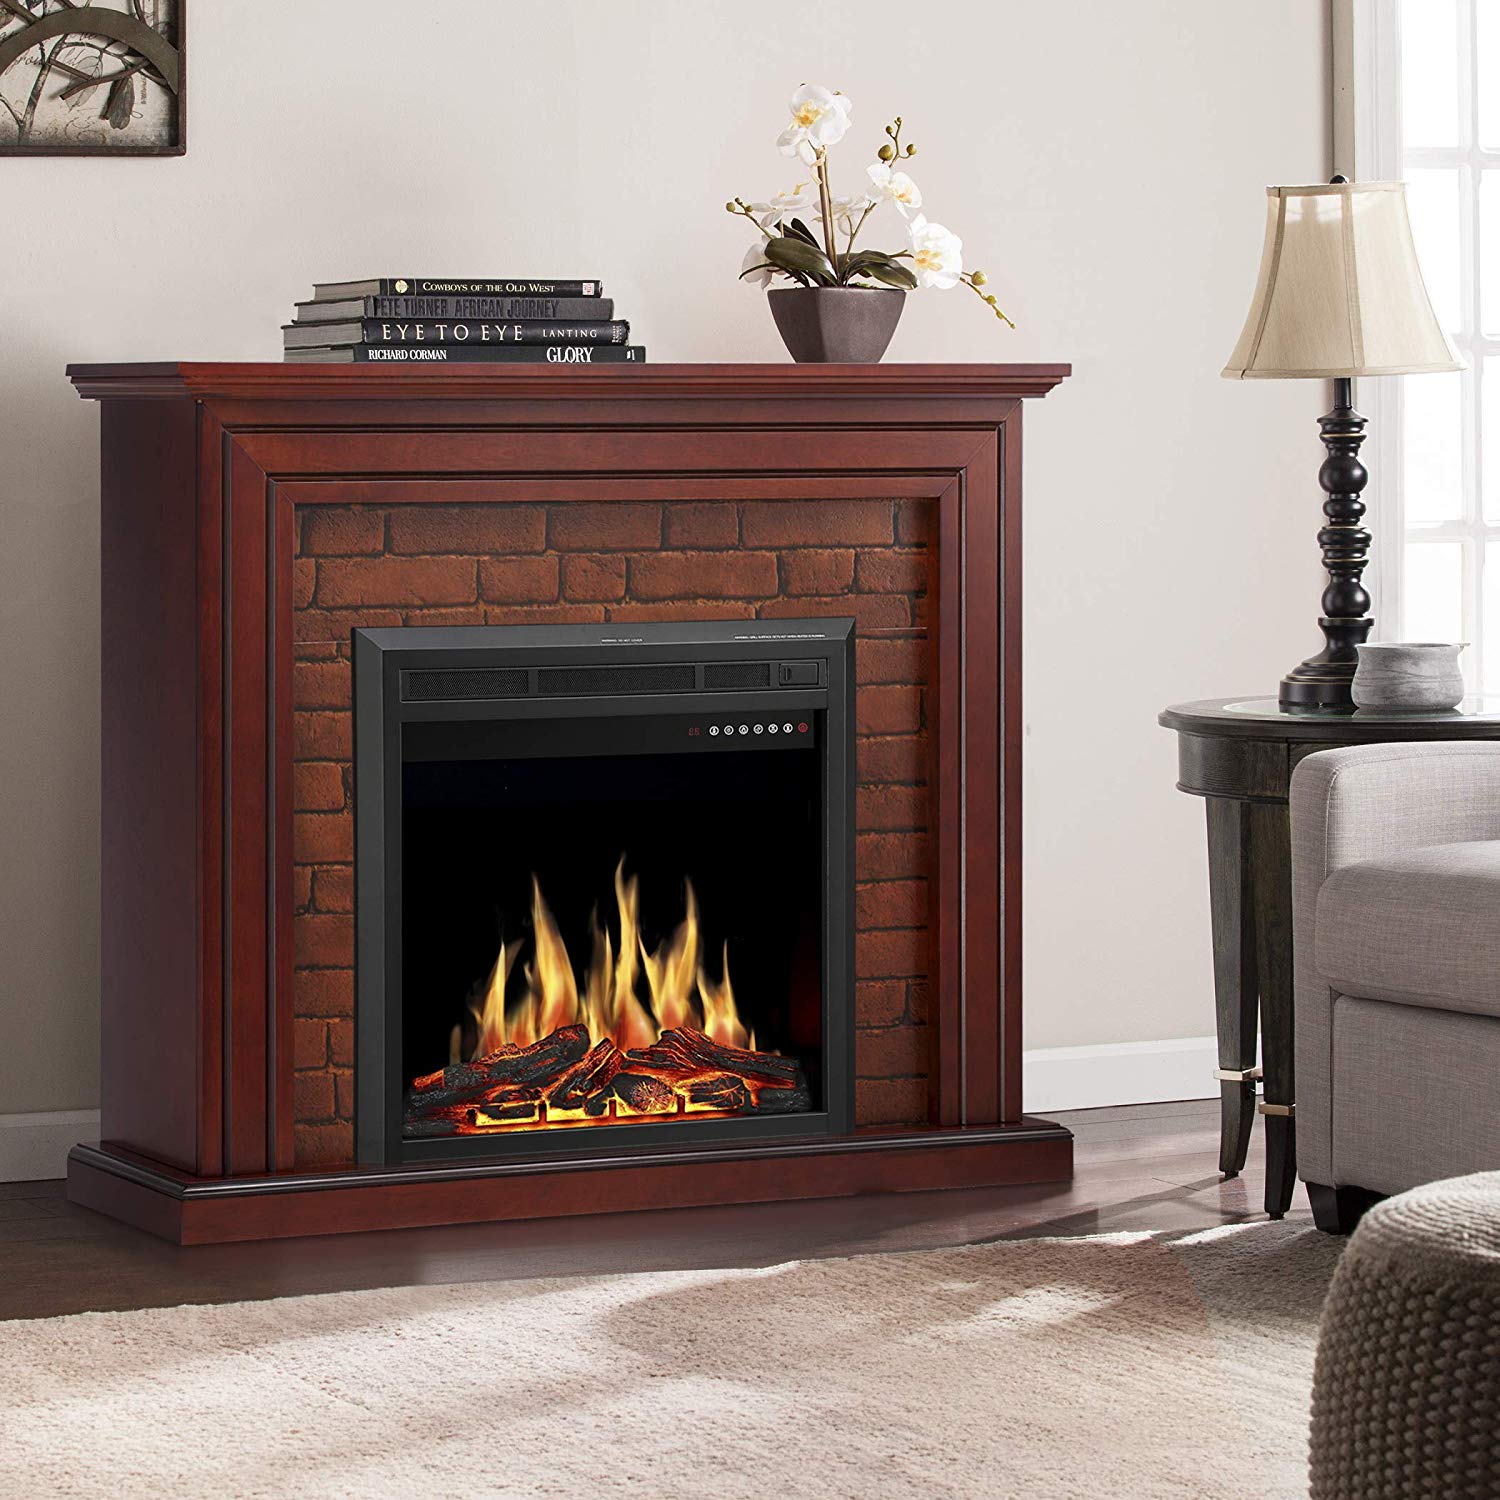 Rooms to Go Electric Fireplace Unique Jamfly Electric Fireplace Mantel Package Traditional Brick Wall Design Heater with Remote Control and Led touch Screen Home Accent Furnishings